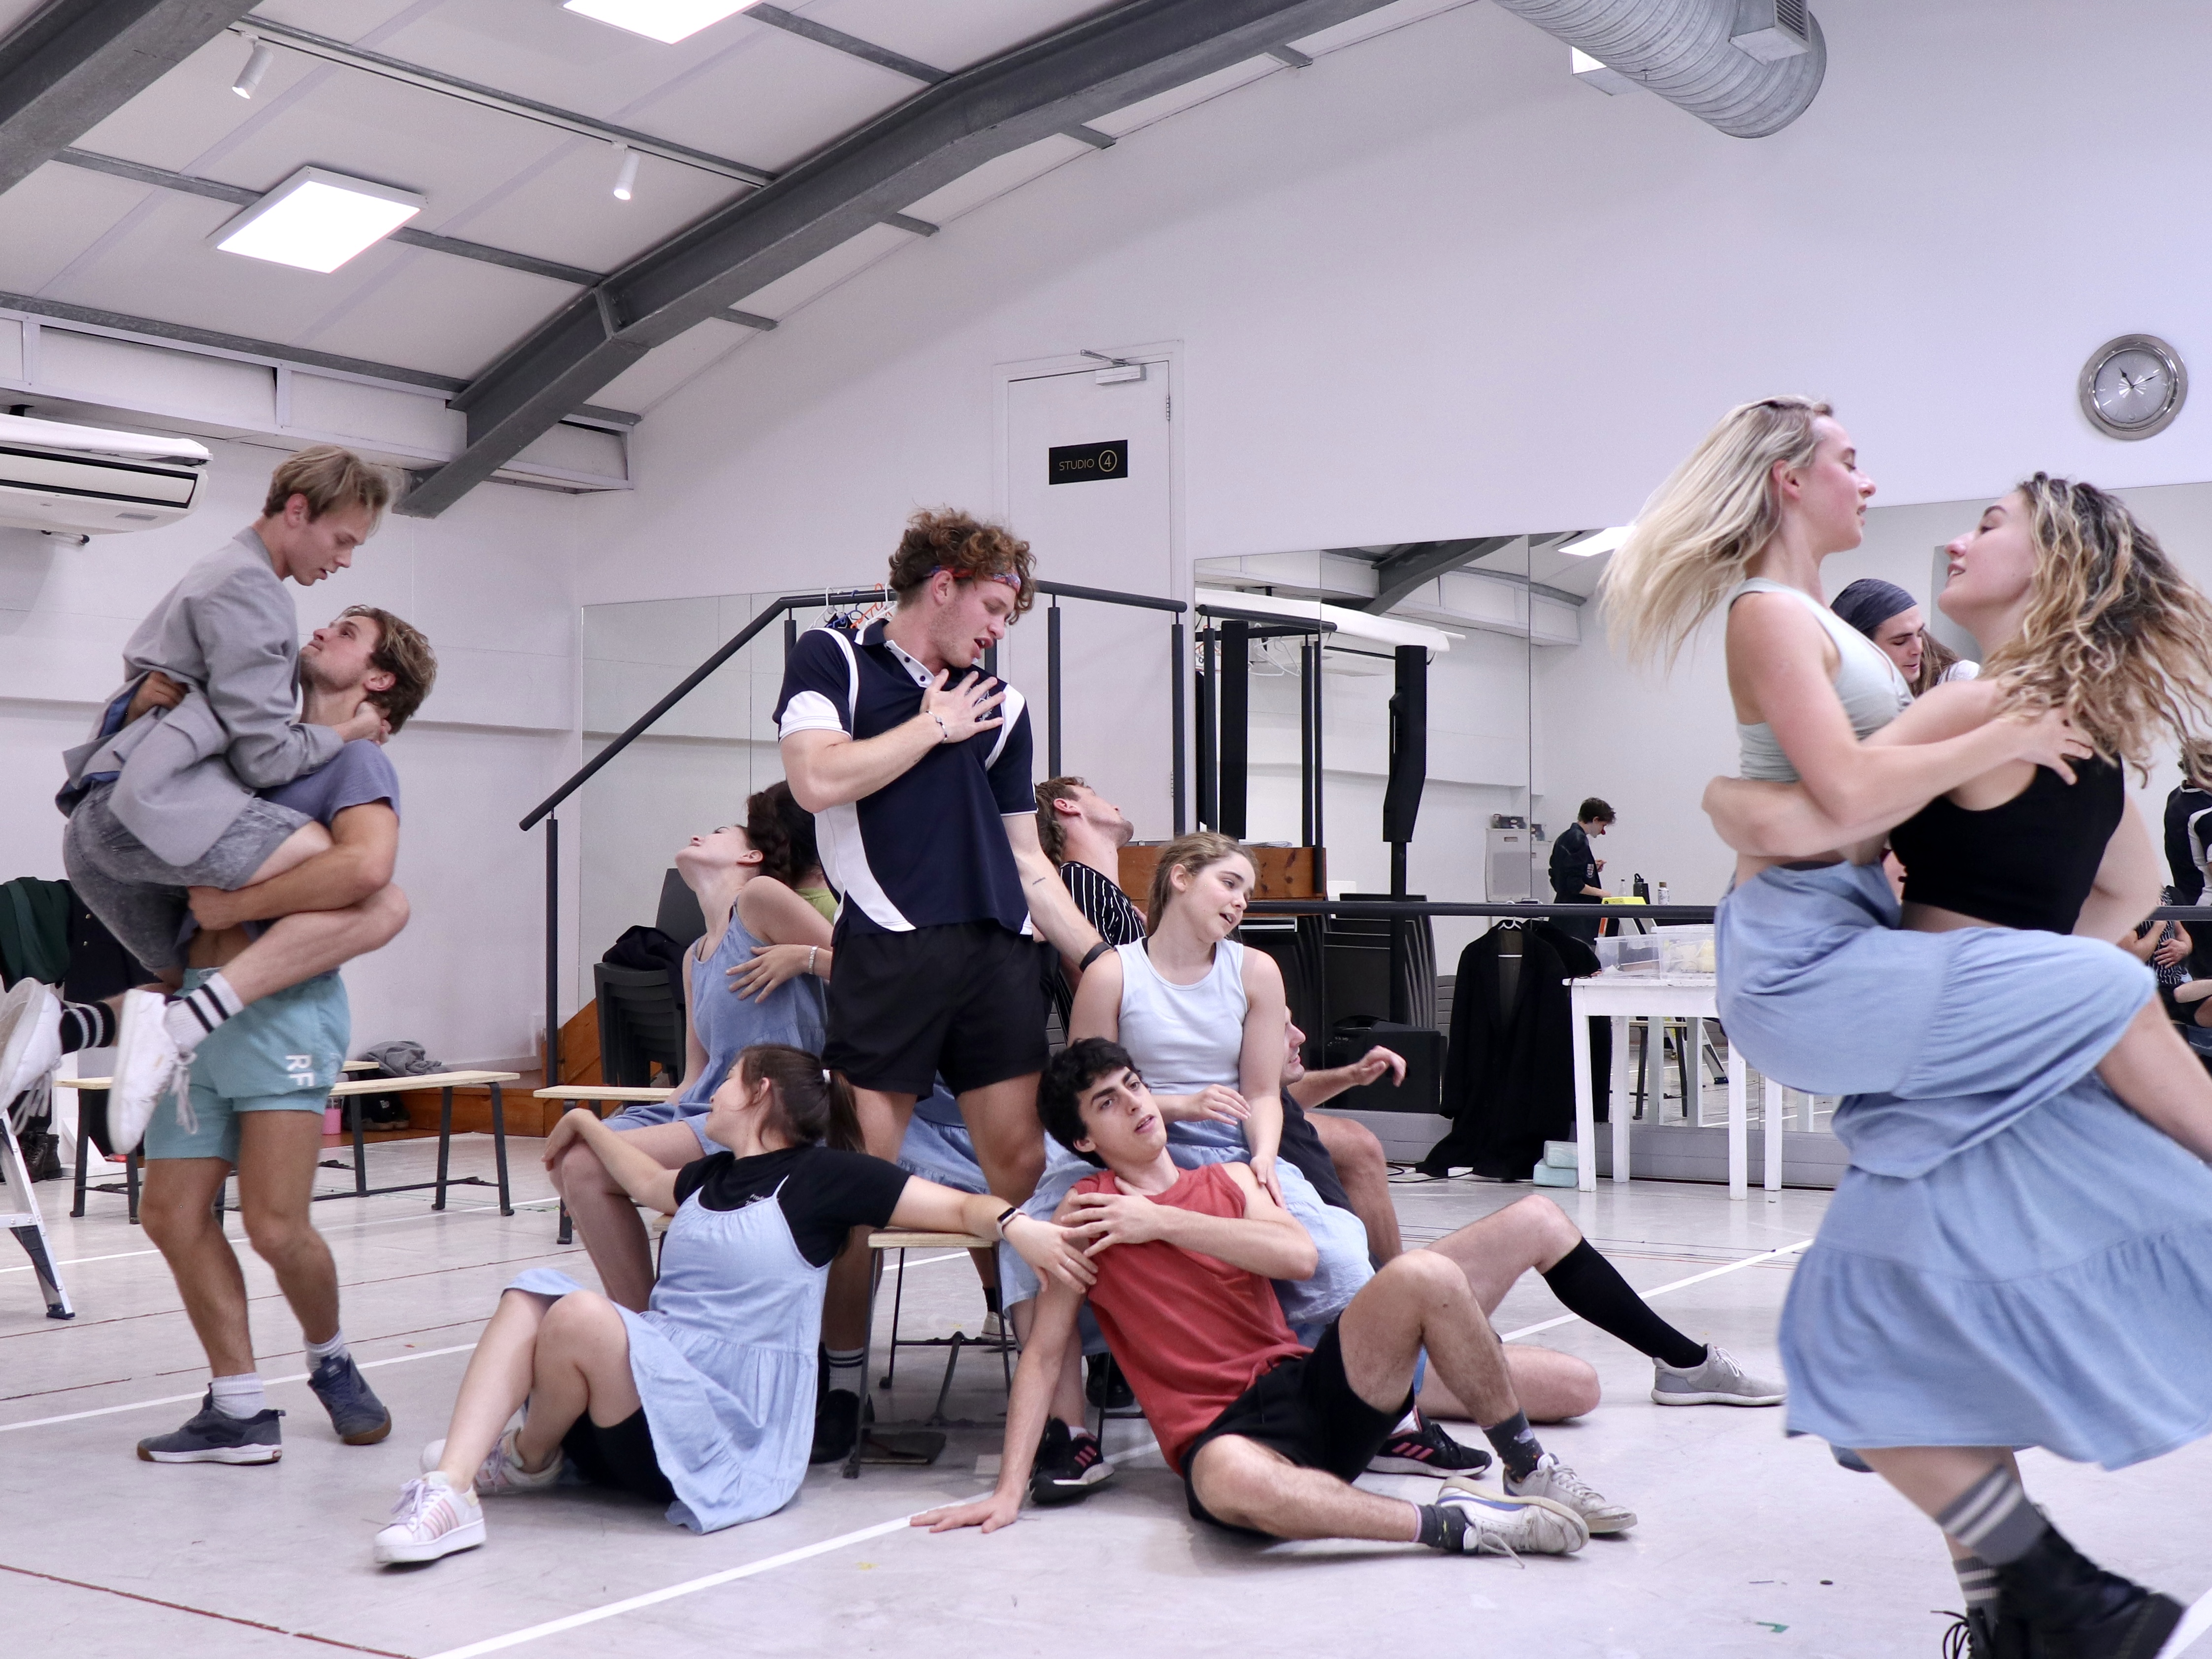 Dylan Janse van Rensburg (hand to heart in the centre) and some of the cast rehearsing a dance number from 'Spring Awakening'. Image: Duane Alexander